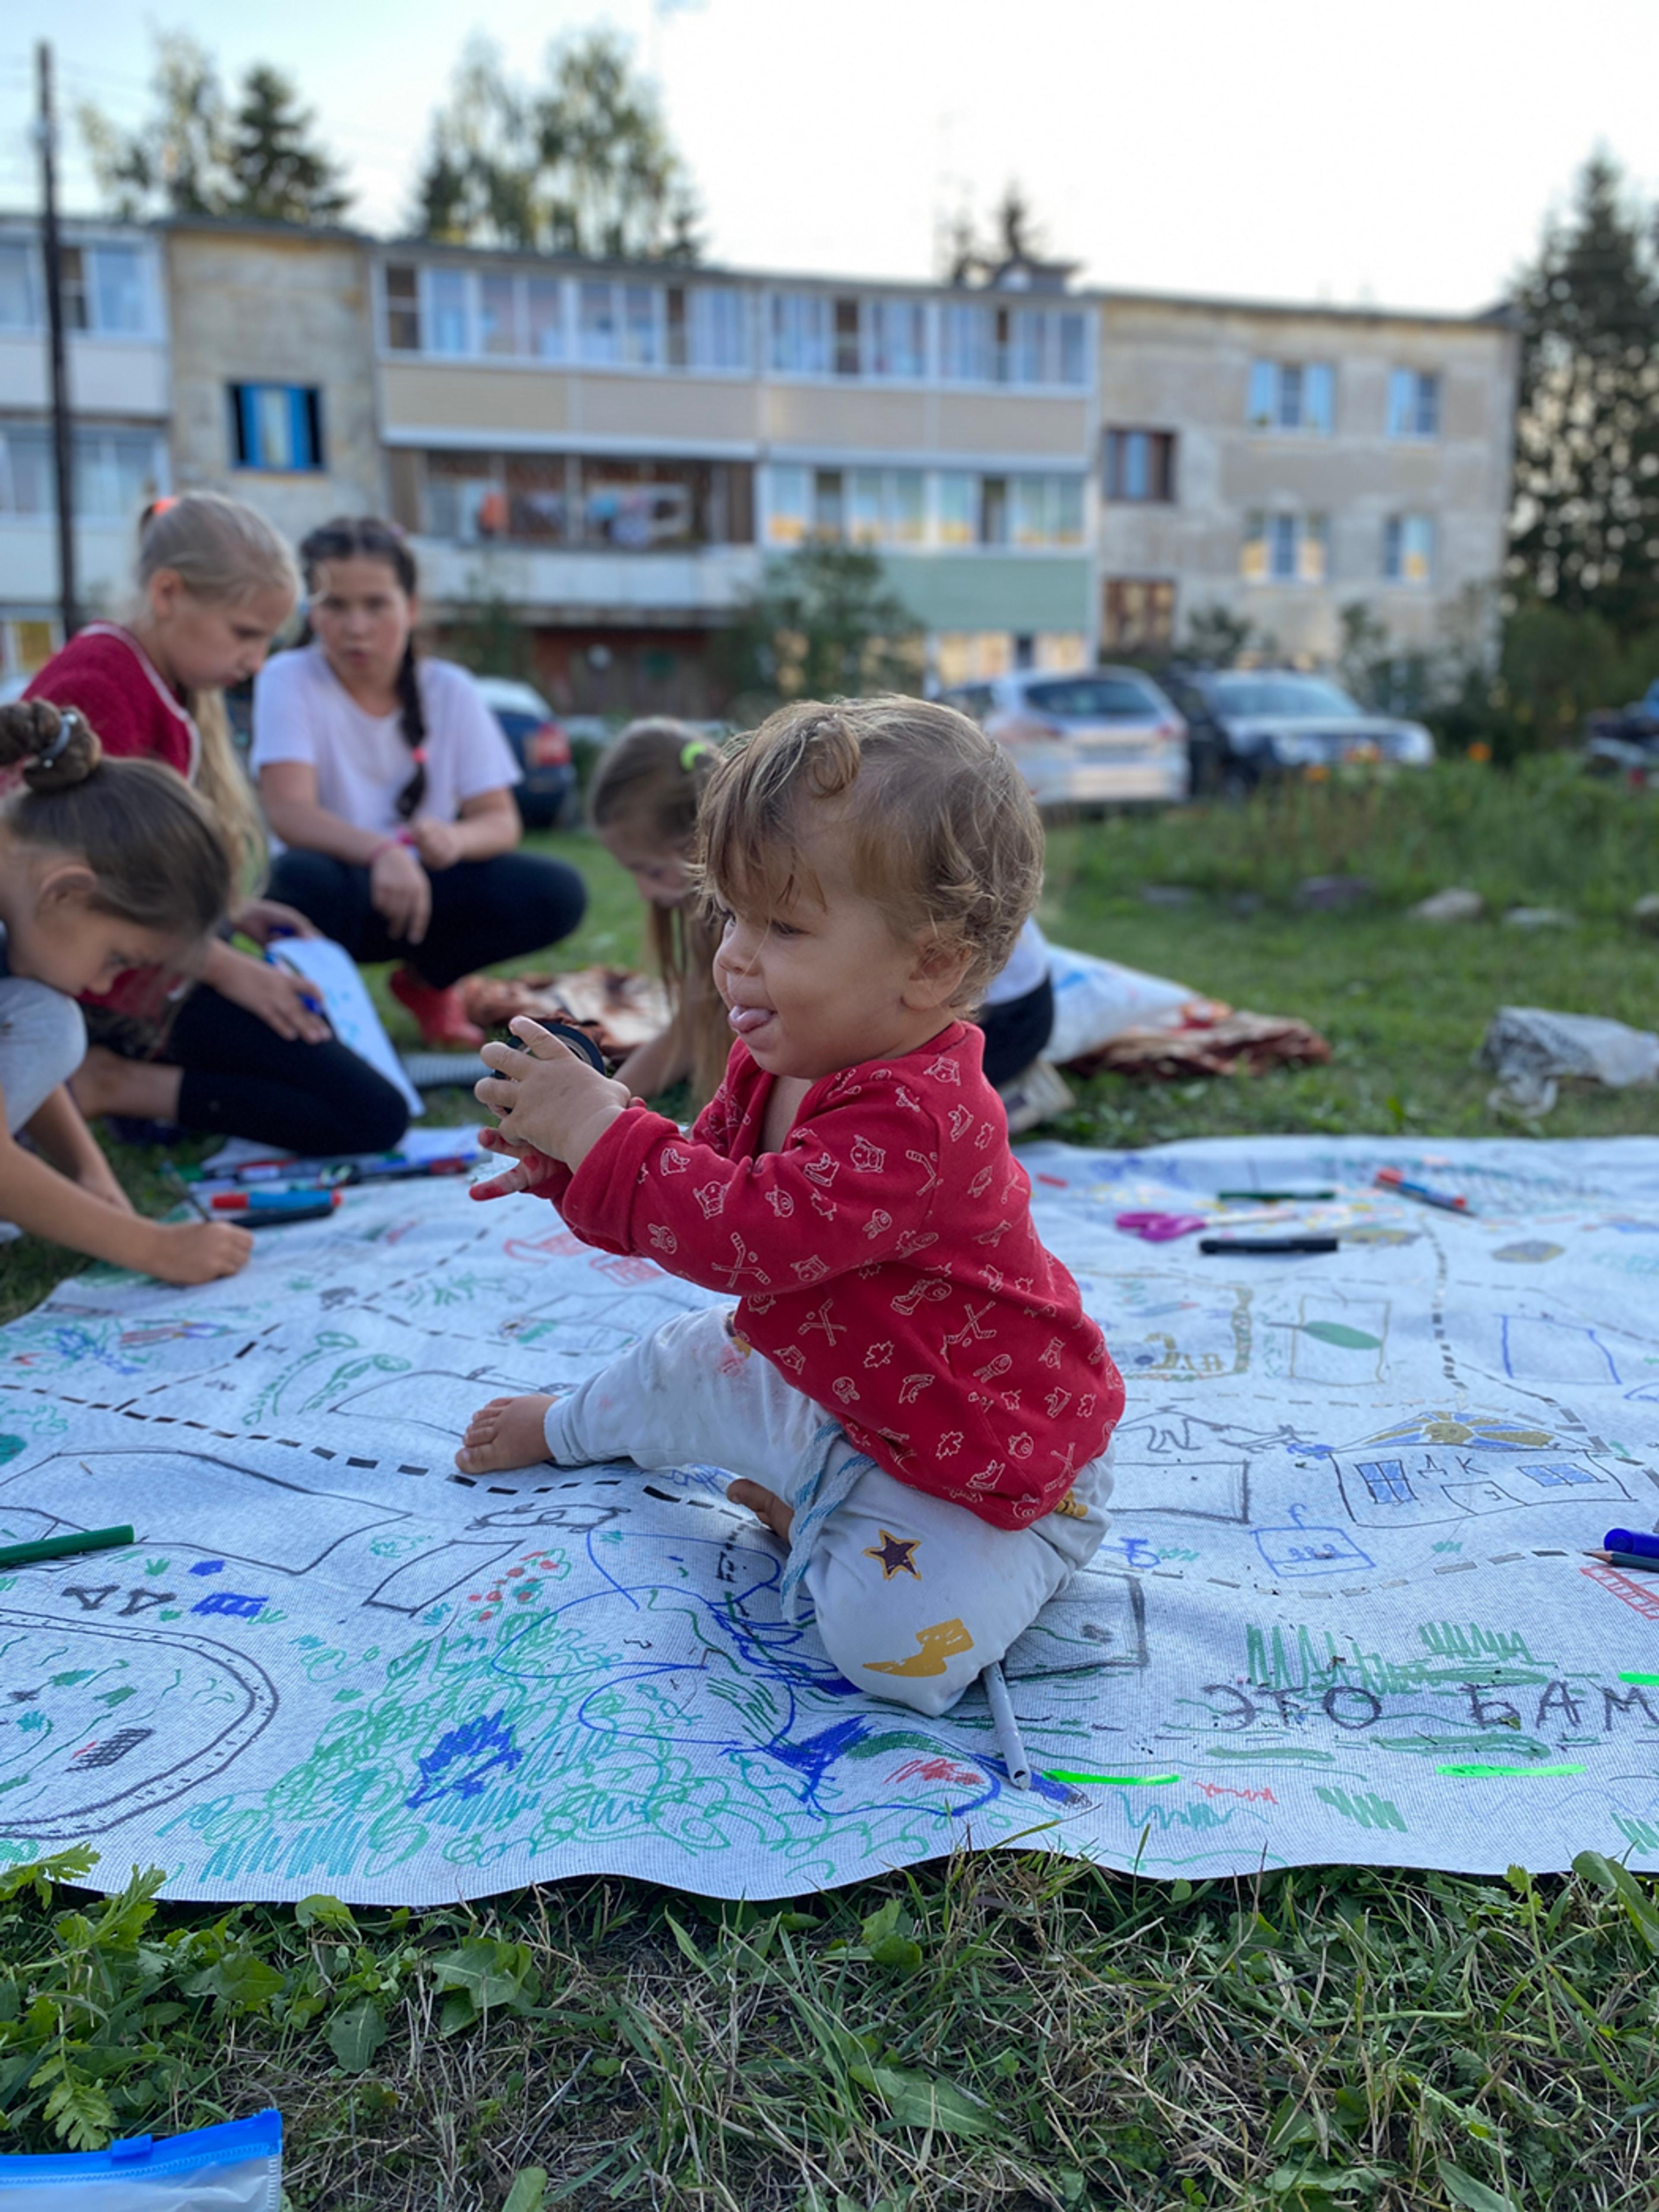 children making a map on the grass